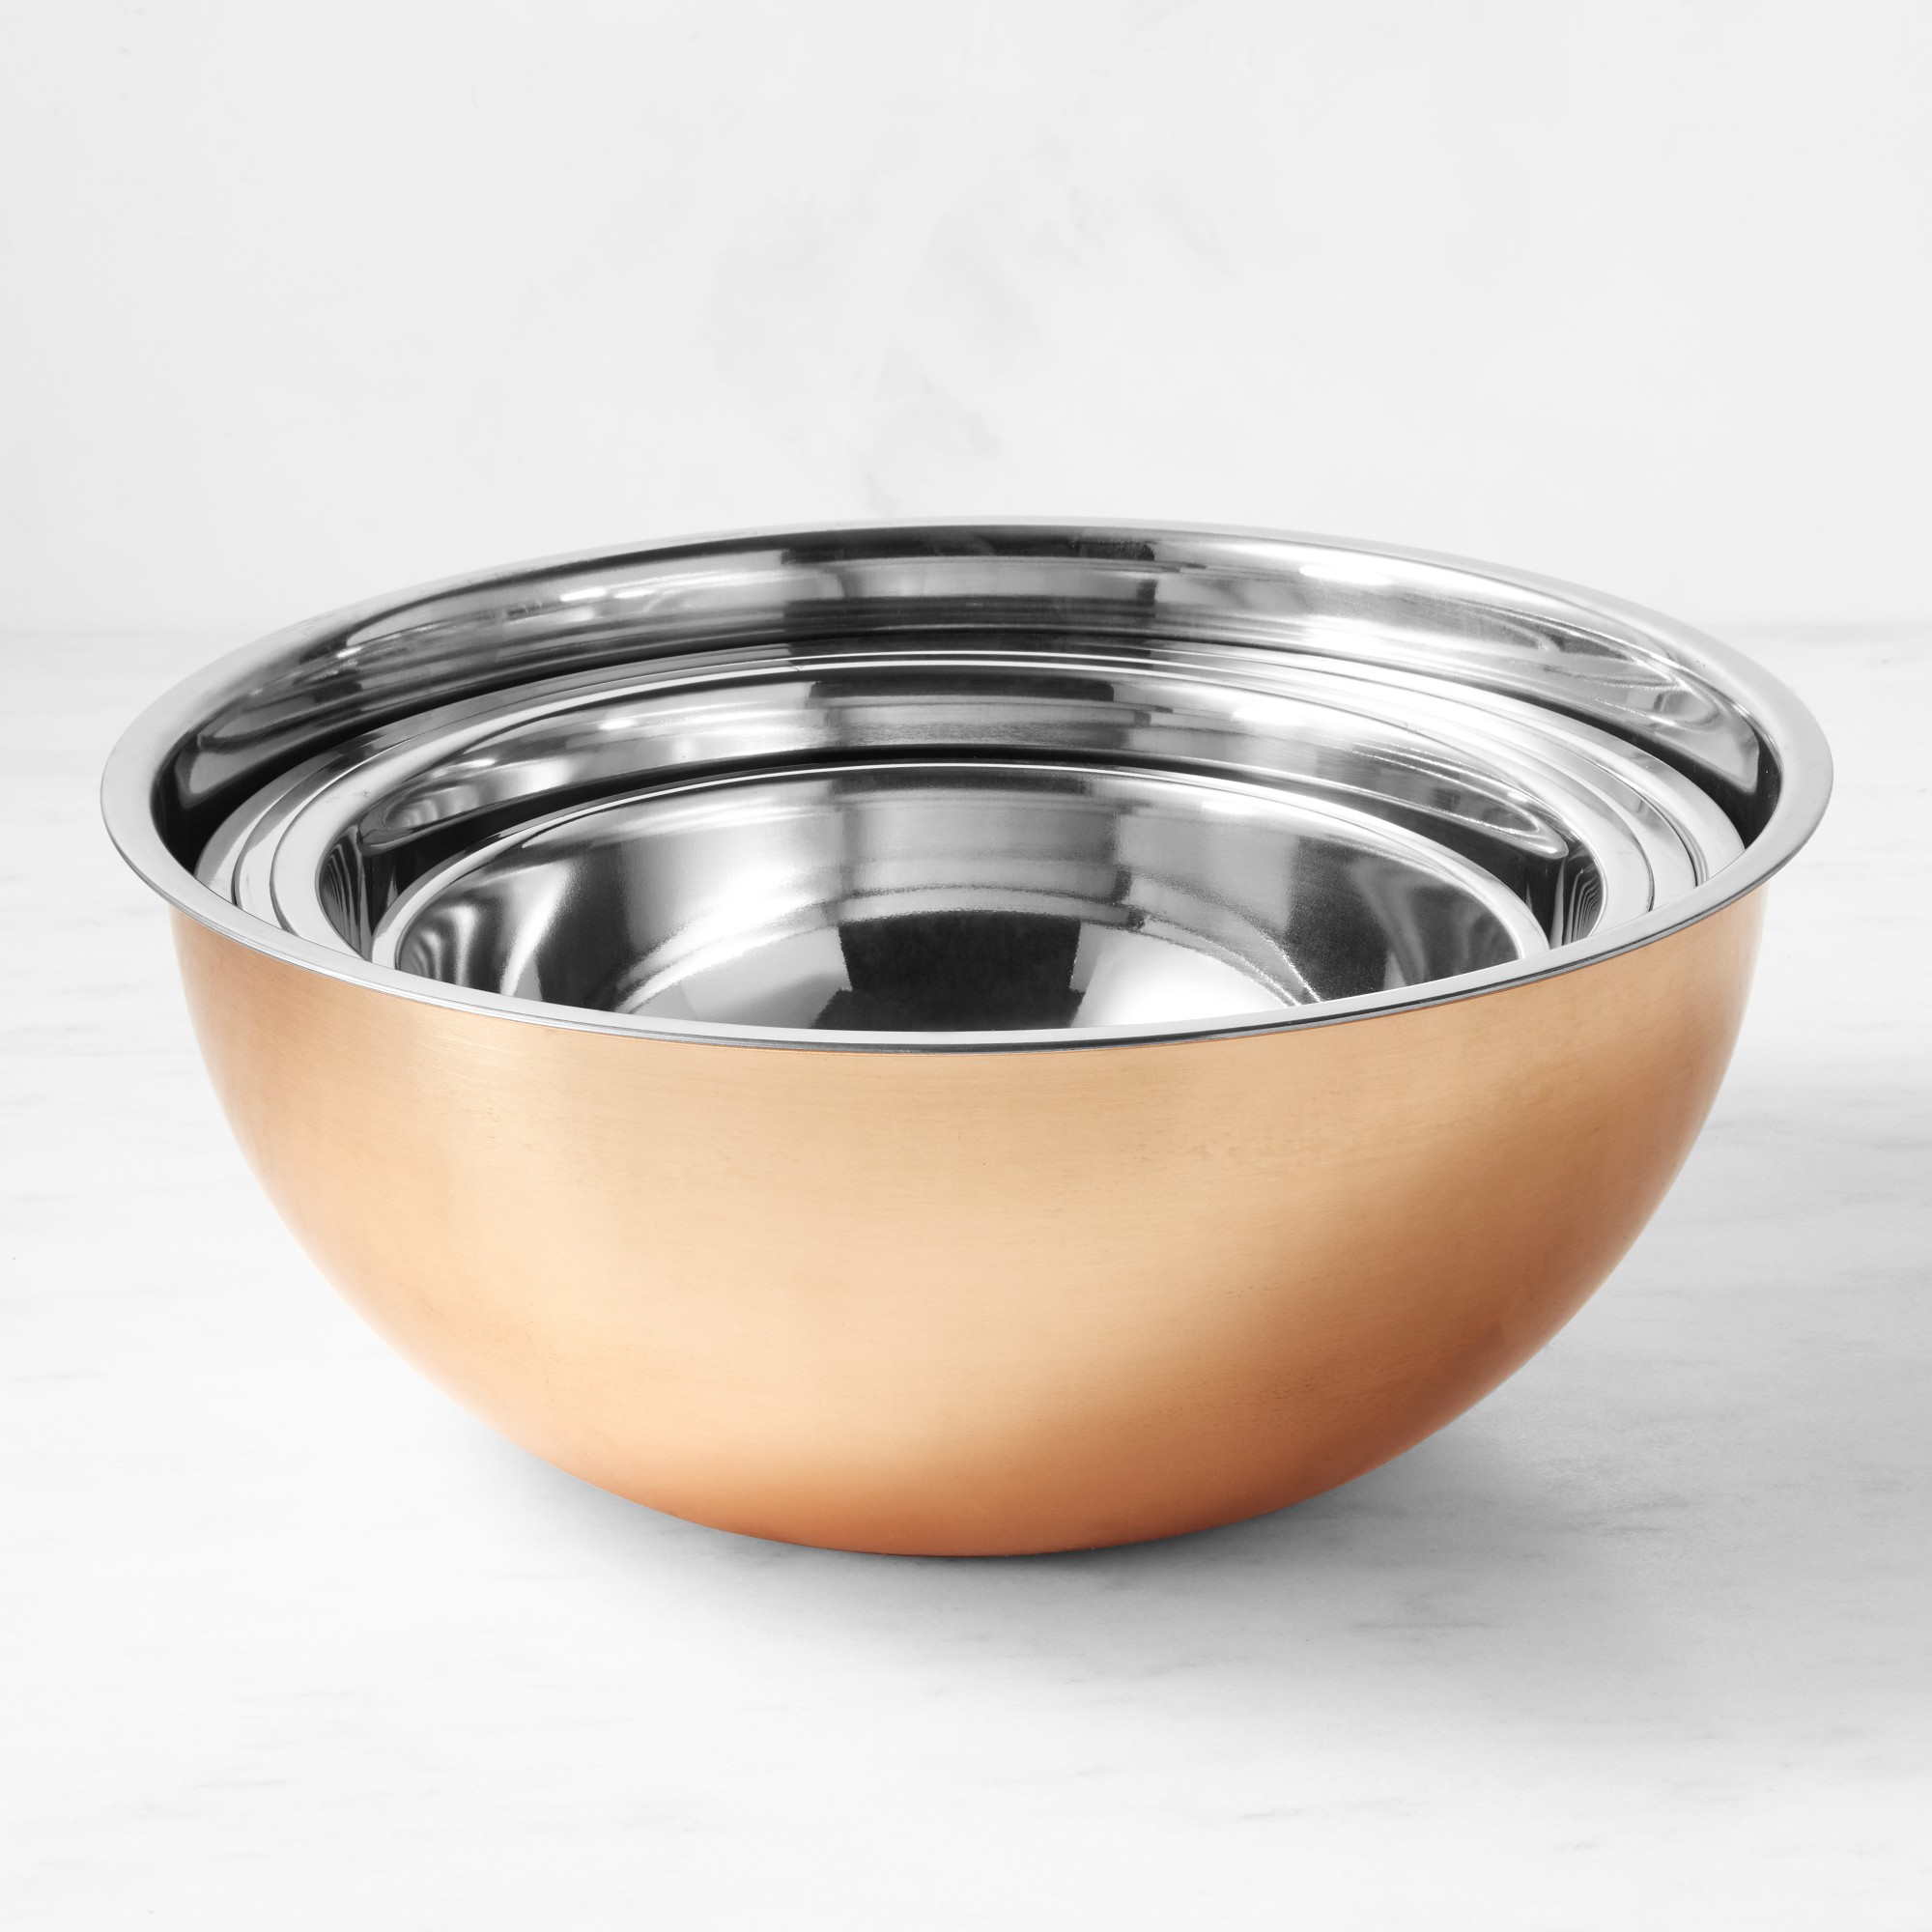 Williams Sonoma Copper Mixing Bowls, Set of 5